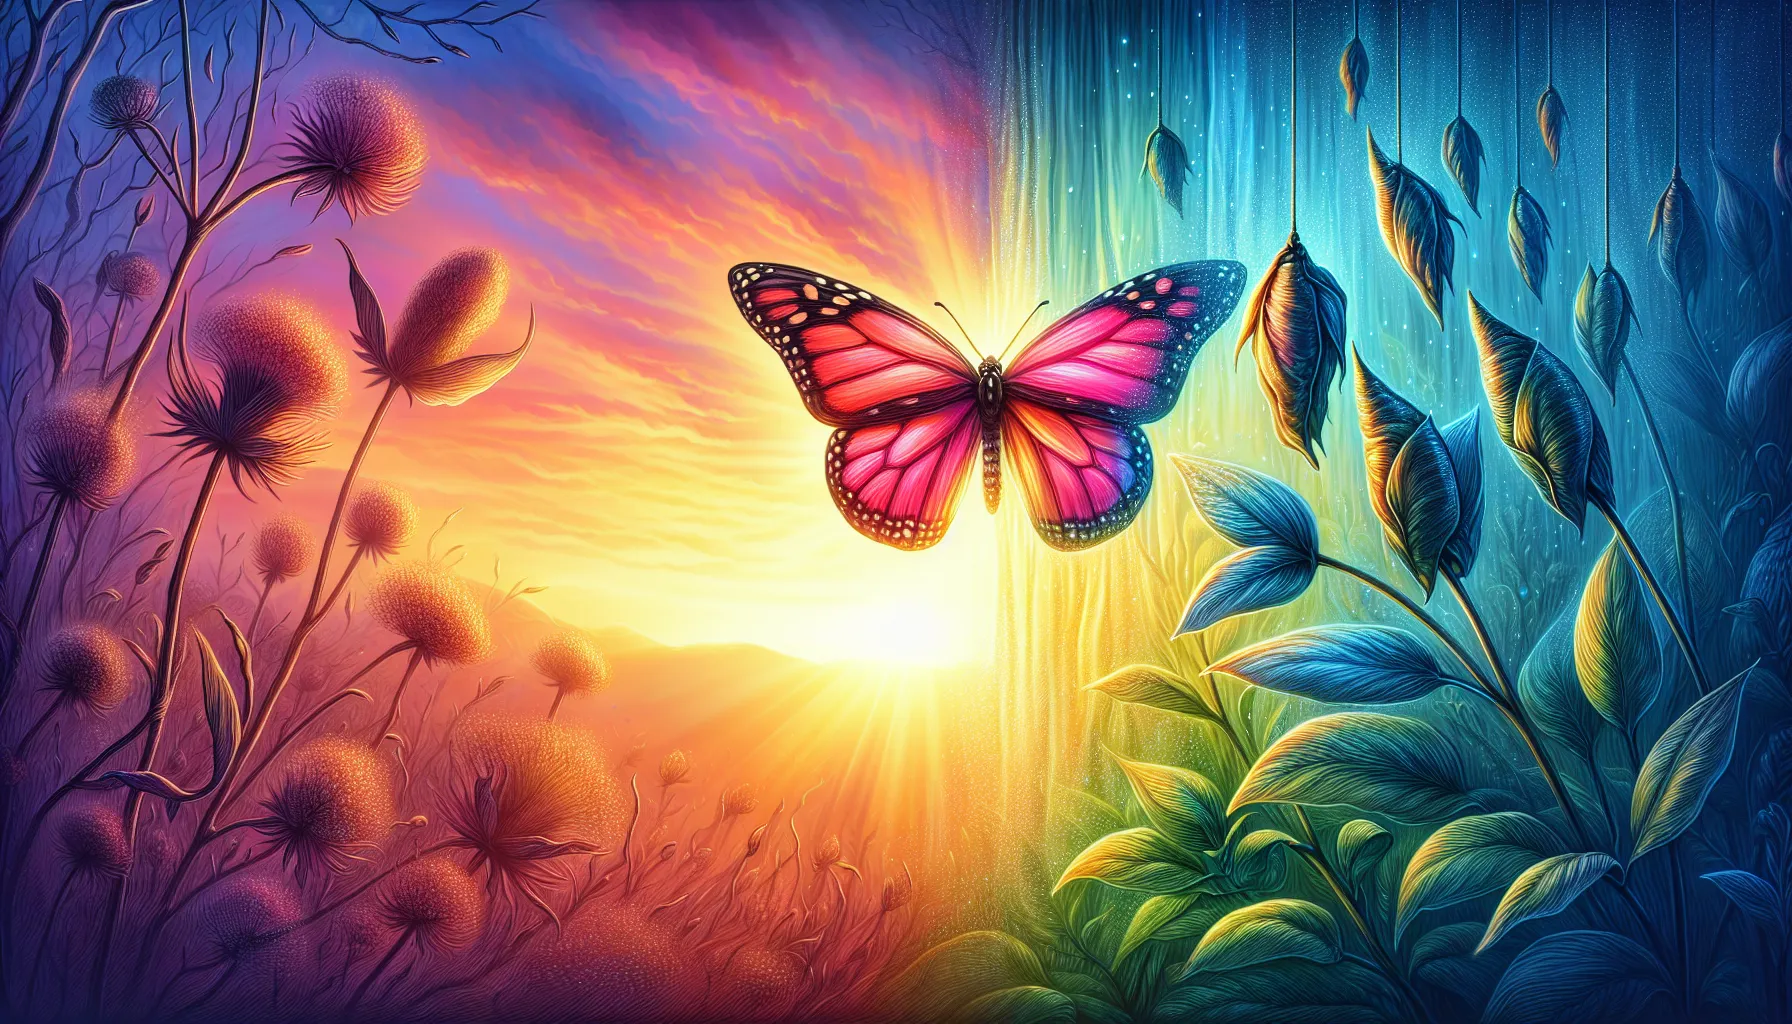 Amidst the first light of dawn, a butterfly unfurls its wings, epitomizing the metamorphosis of the soul as it opens to the tender possibilities of love and companionship.